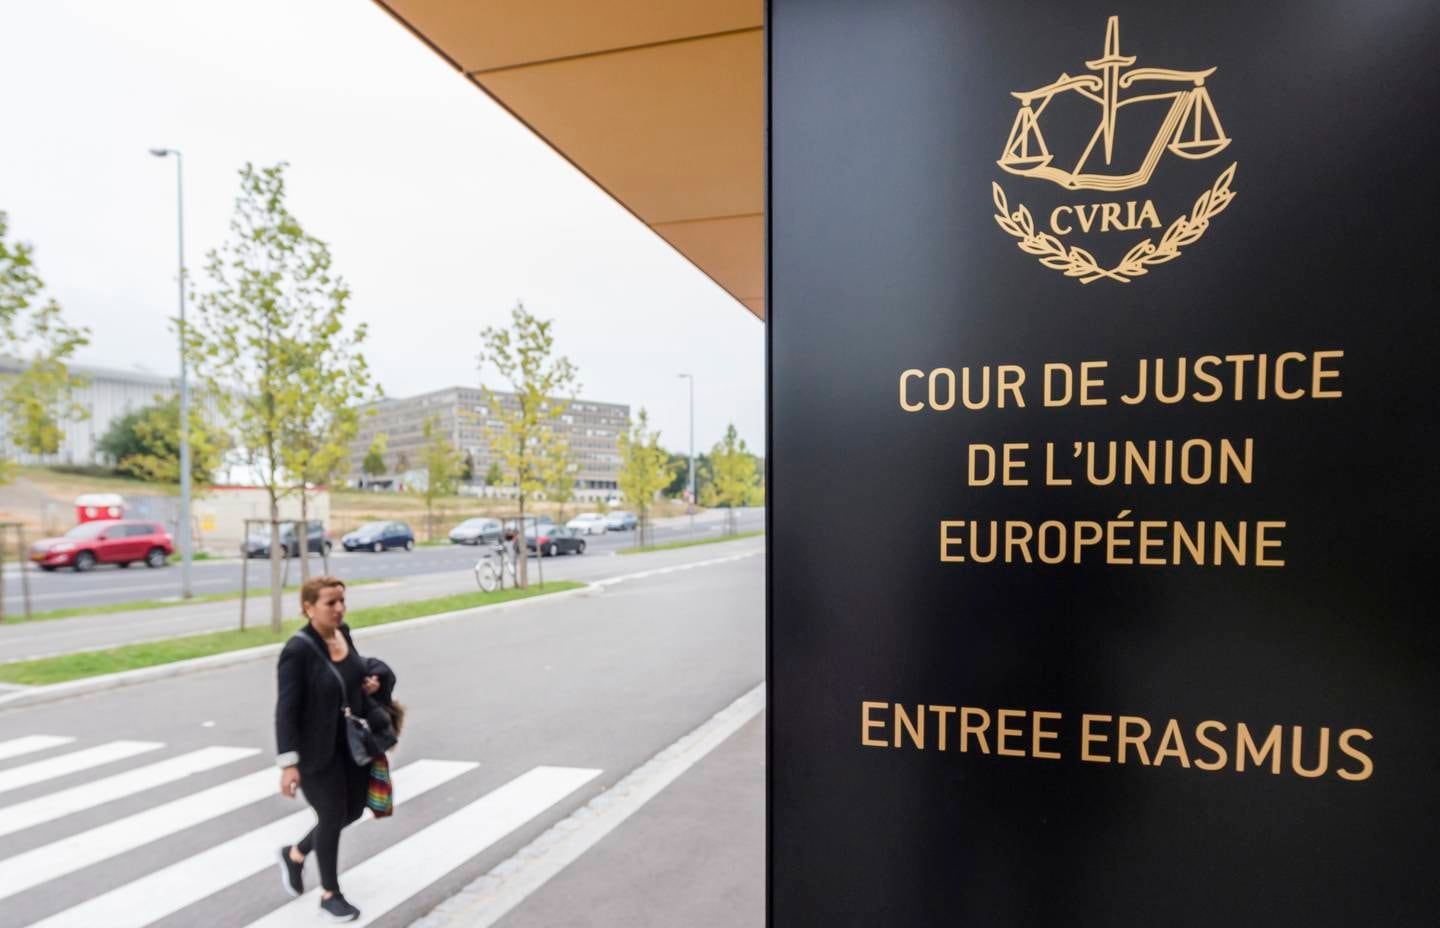 In this photo taken on Monday, Oct. 5, 2015 a woman walks by the entrance to the European Court of Justice in Luxembourg. The European Union's top court ruled Monday, Dec. 10, 2018, that Britain can change its mind over Brexit, boosting the hopes of people who want to stay in the EU that the process can be reversed. (AP Photo/Geert Vanden Wijngaert)